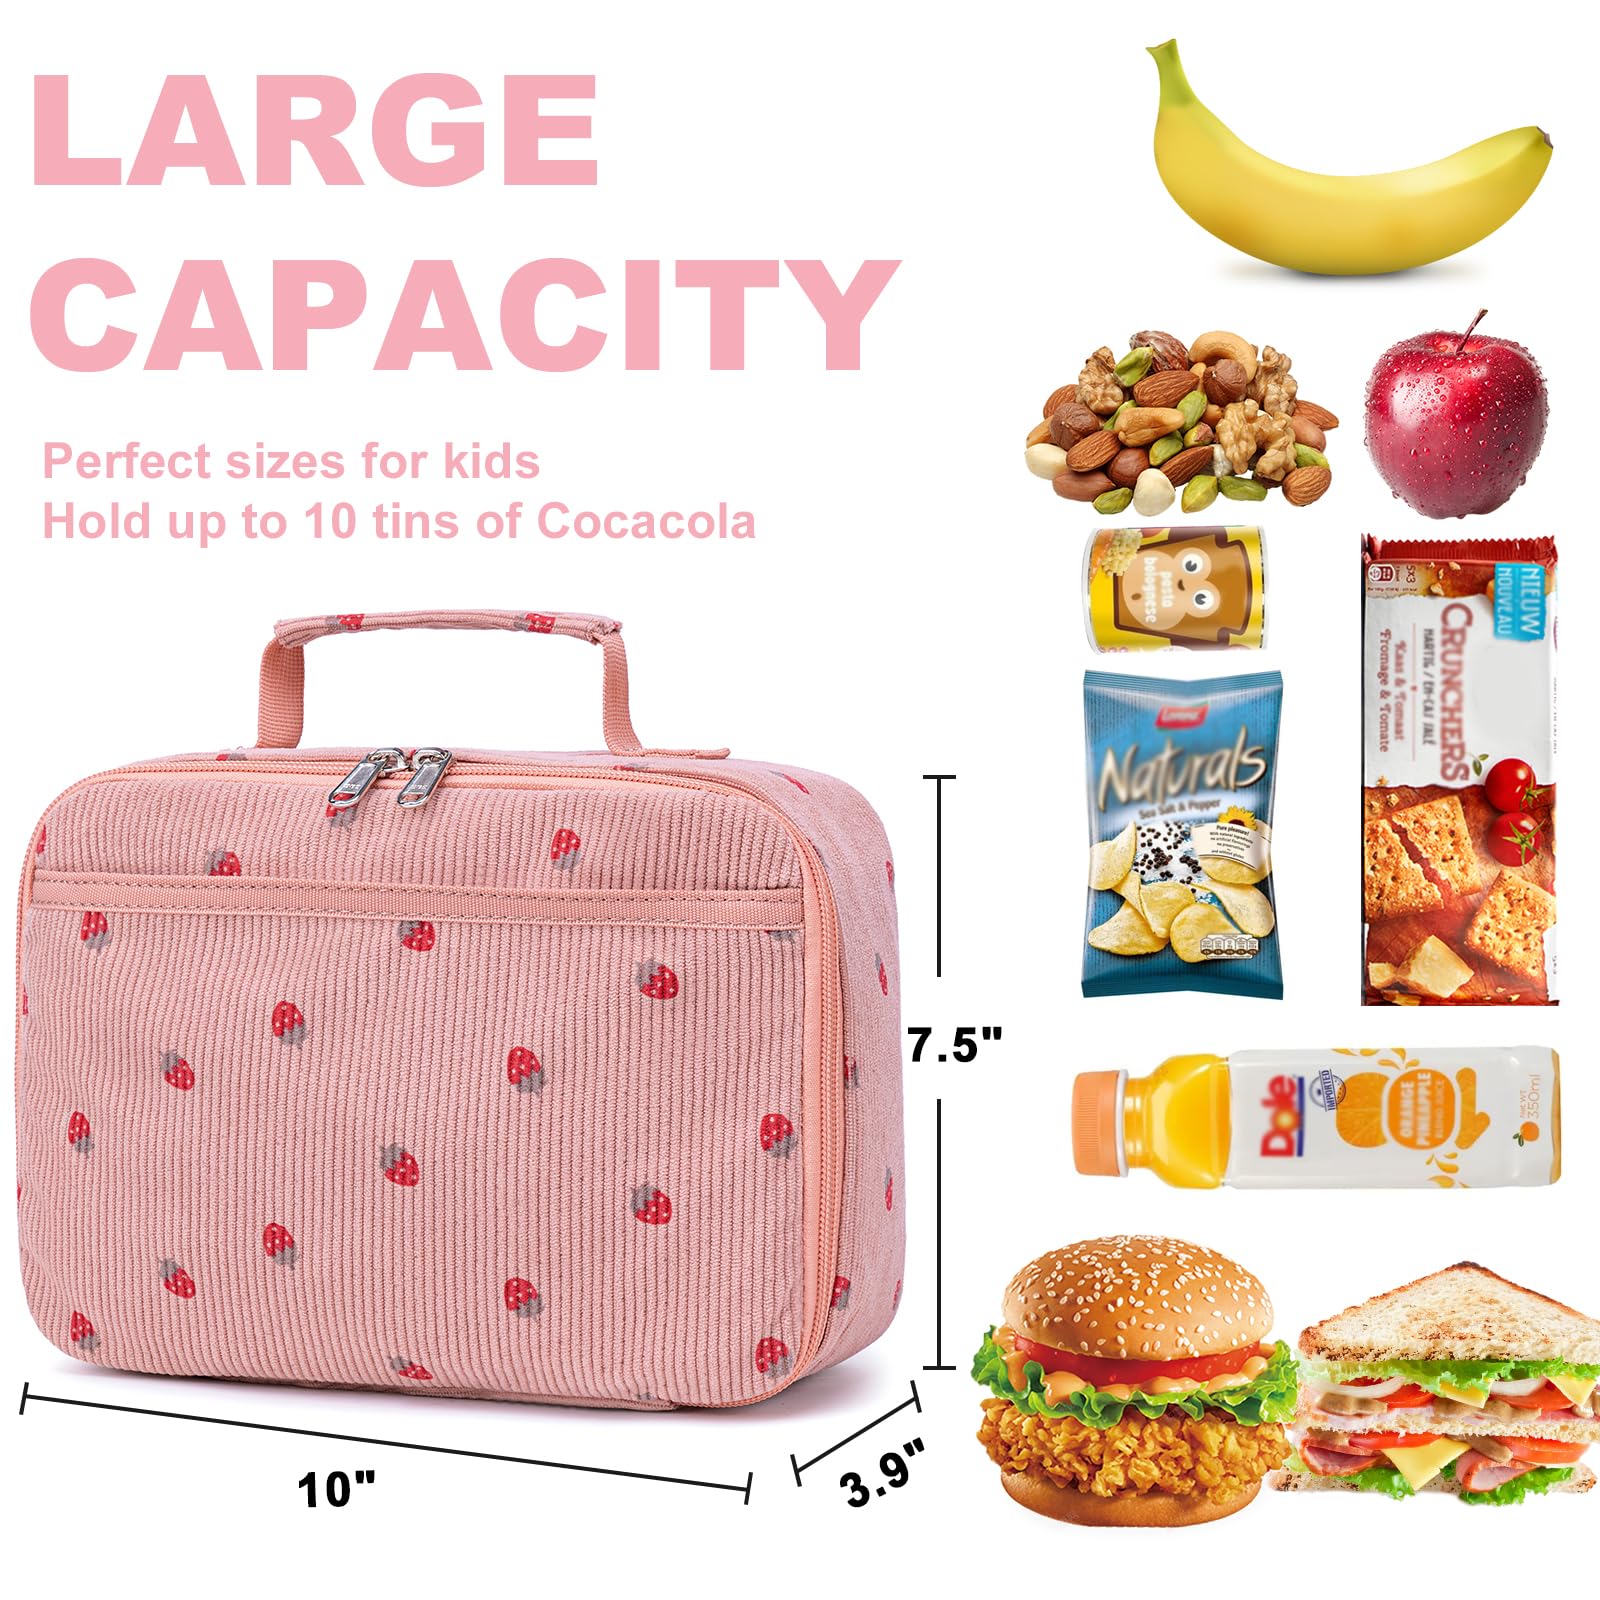 Kids Girls Corduroy Insulated Lunch Box Bag Product Details